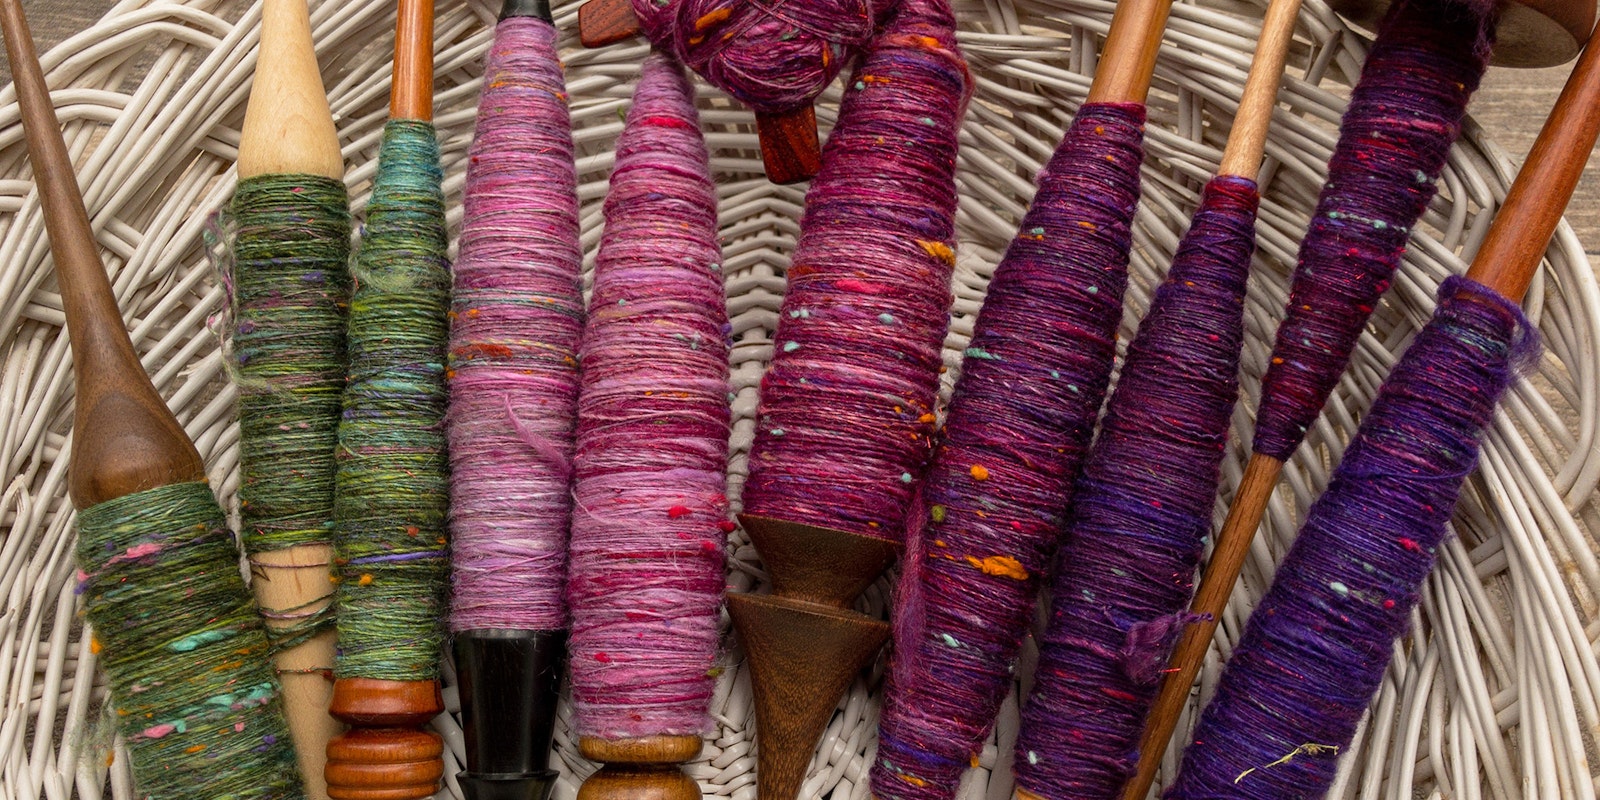 Her Handspun Habit: How to Ply Yarn from Spindles (Part I)